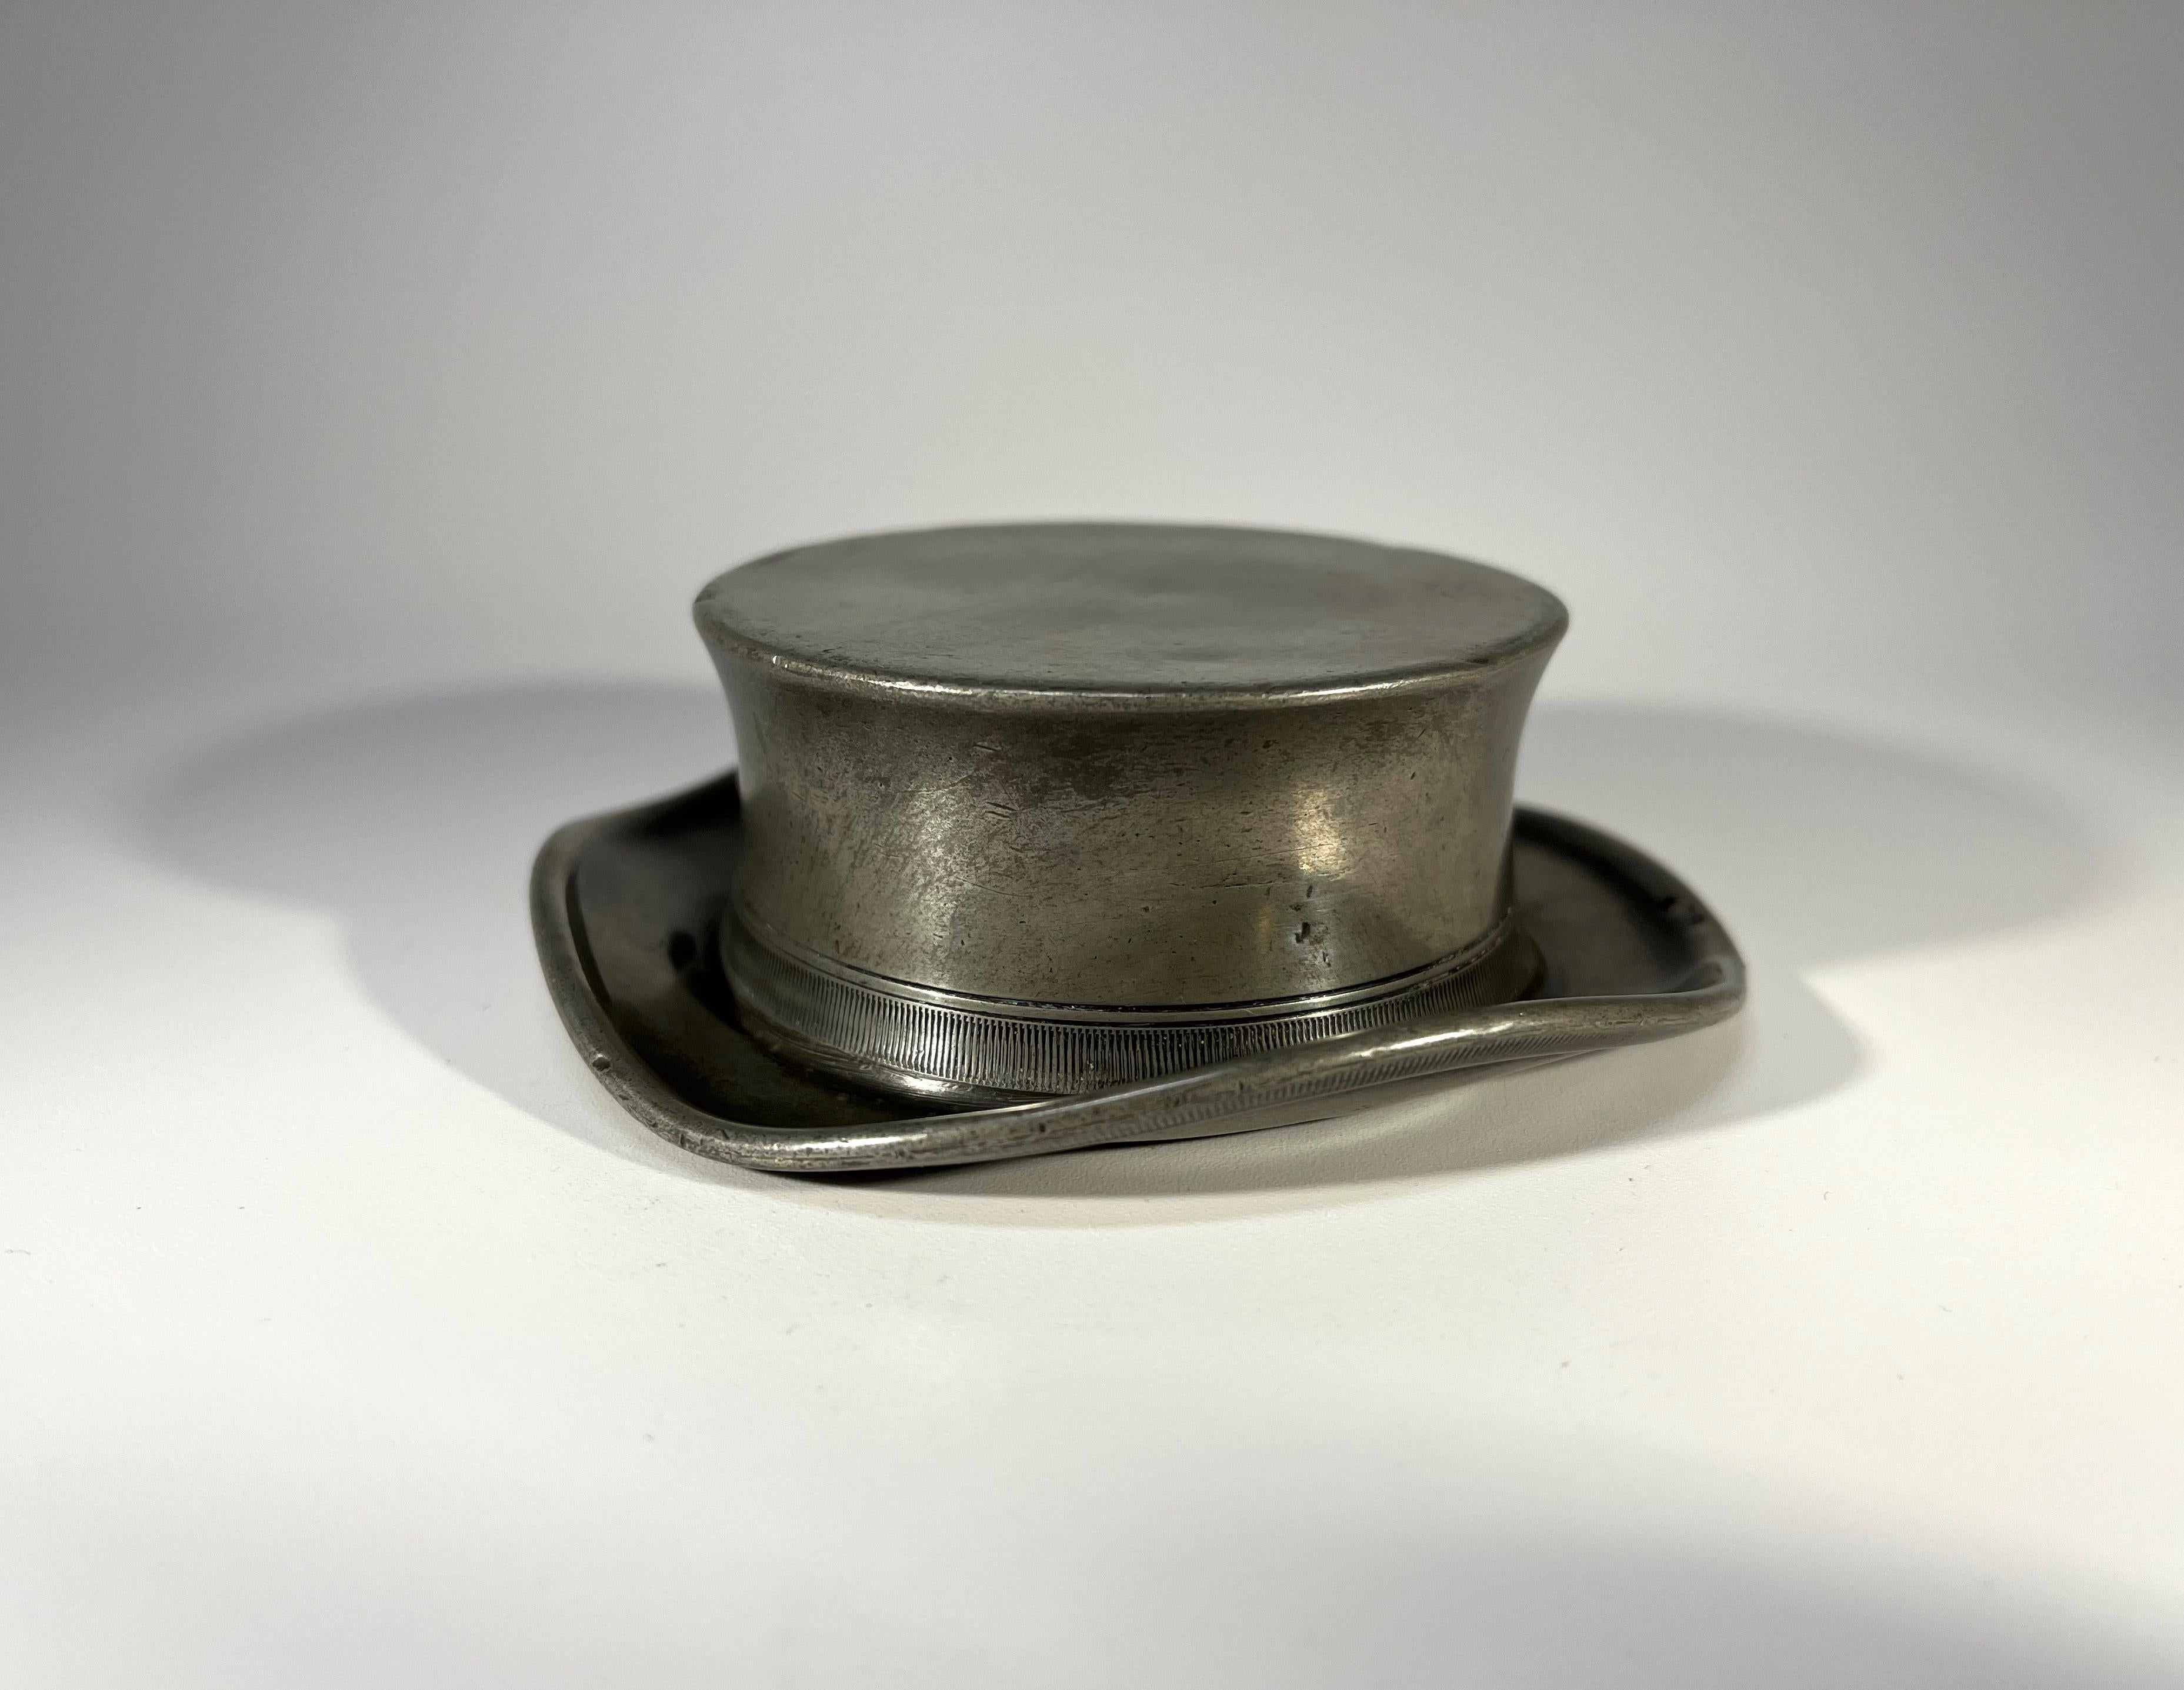 Victorian pewter gentleman's Pickwickian Hat paperweight 
This Dickensian piece makes for a novel desk accessory
Typical aged patina on this cherished piece
Height 1.25 inch, Diameter 3.75
In good condition
Wear consistent with age and use